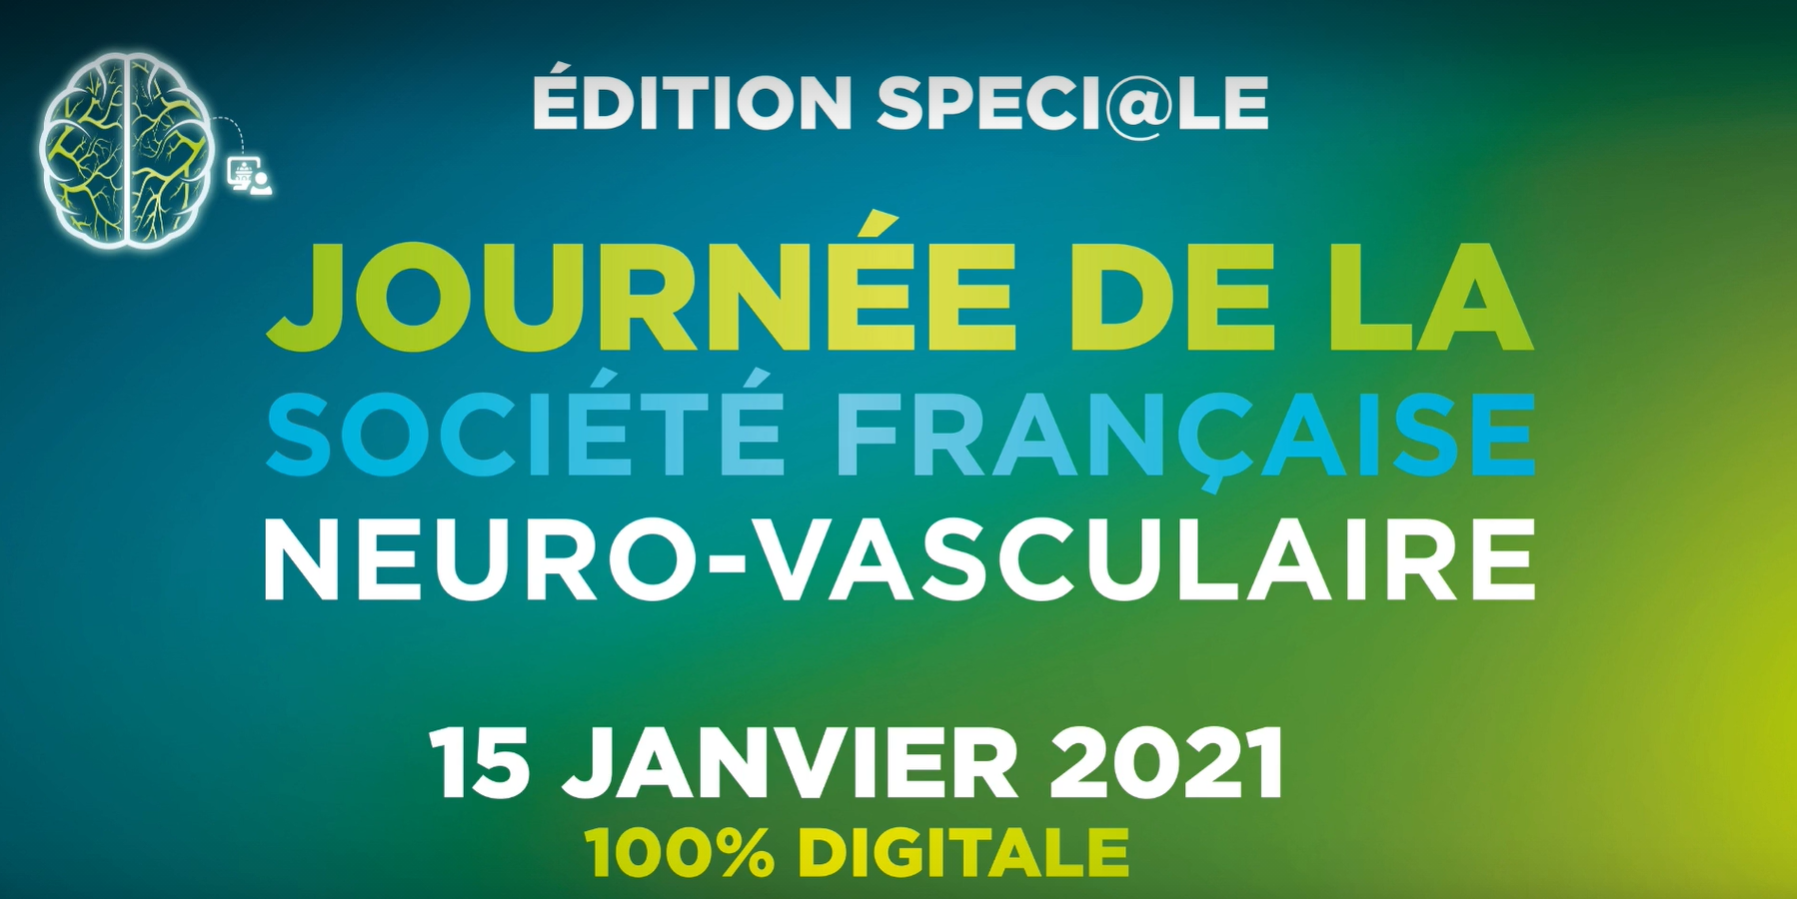 Special Hybrid Day of the French Society of Neurovascular - SFNV 2021